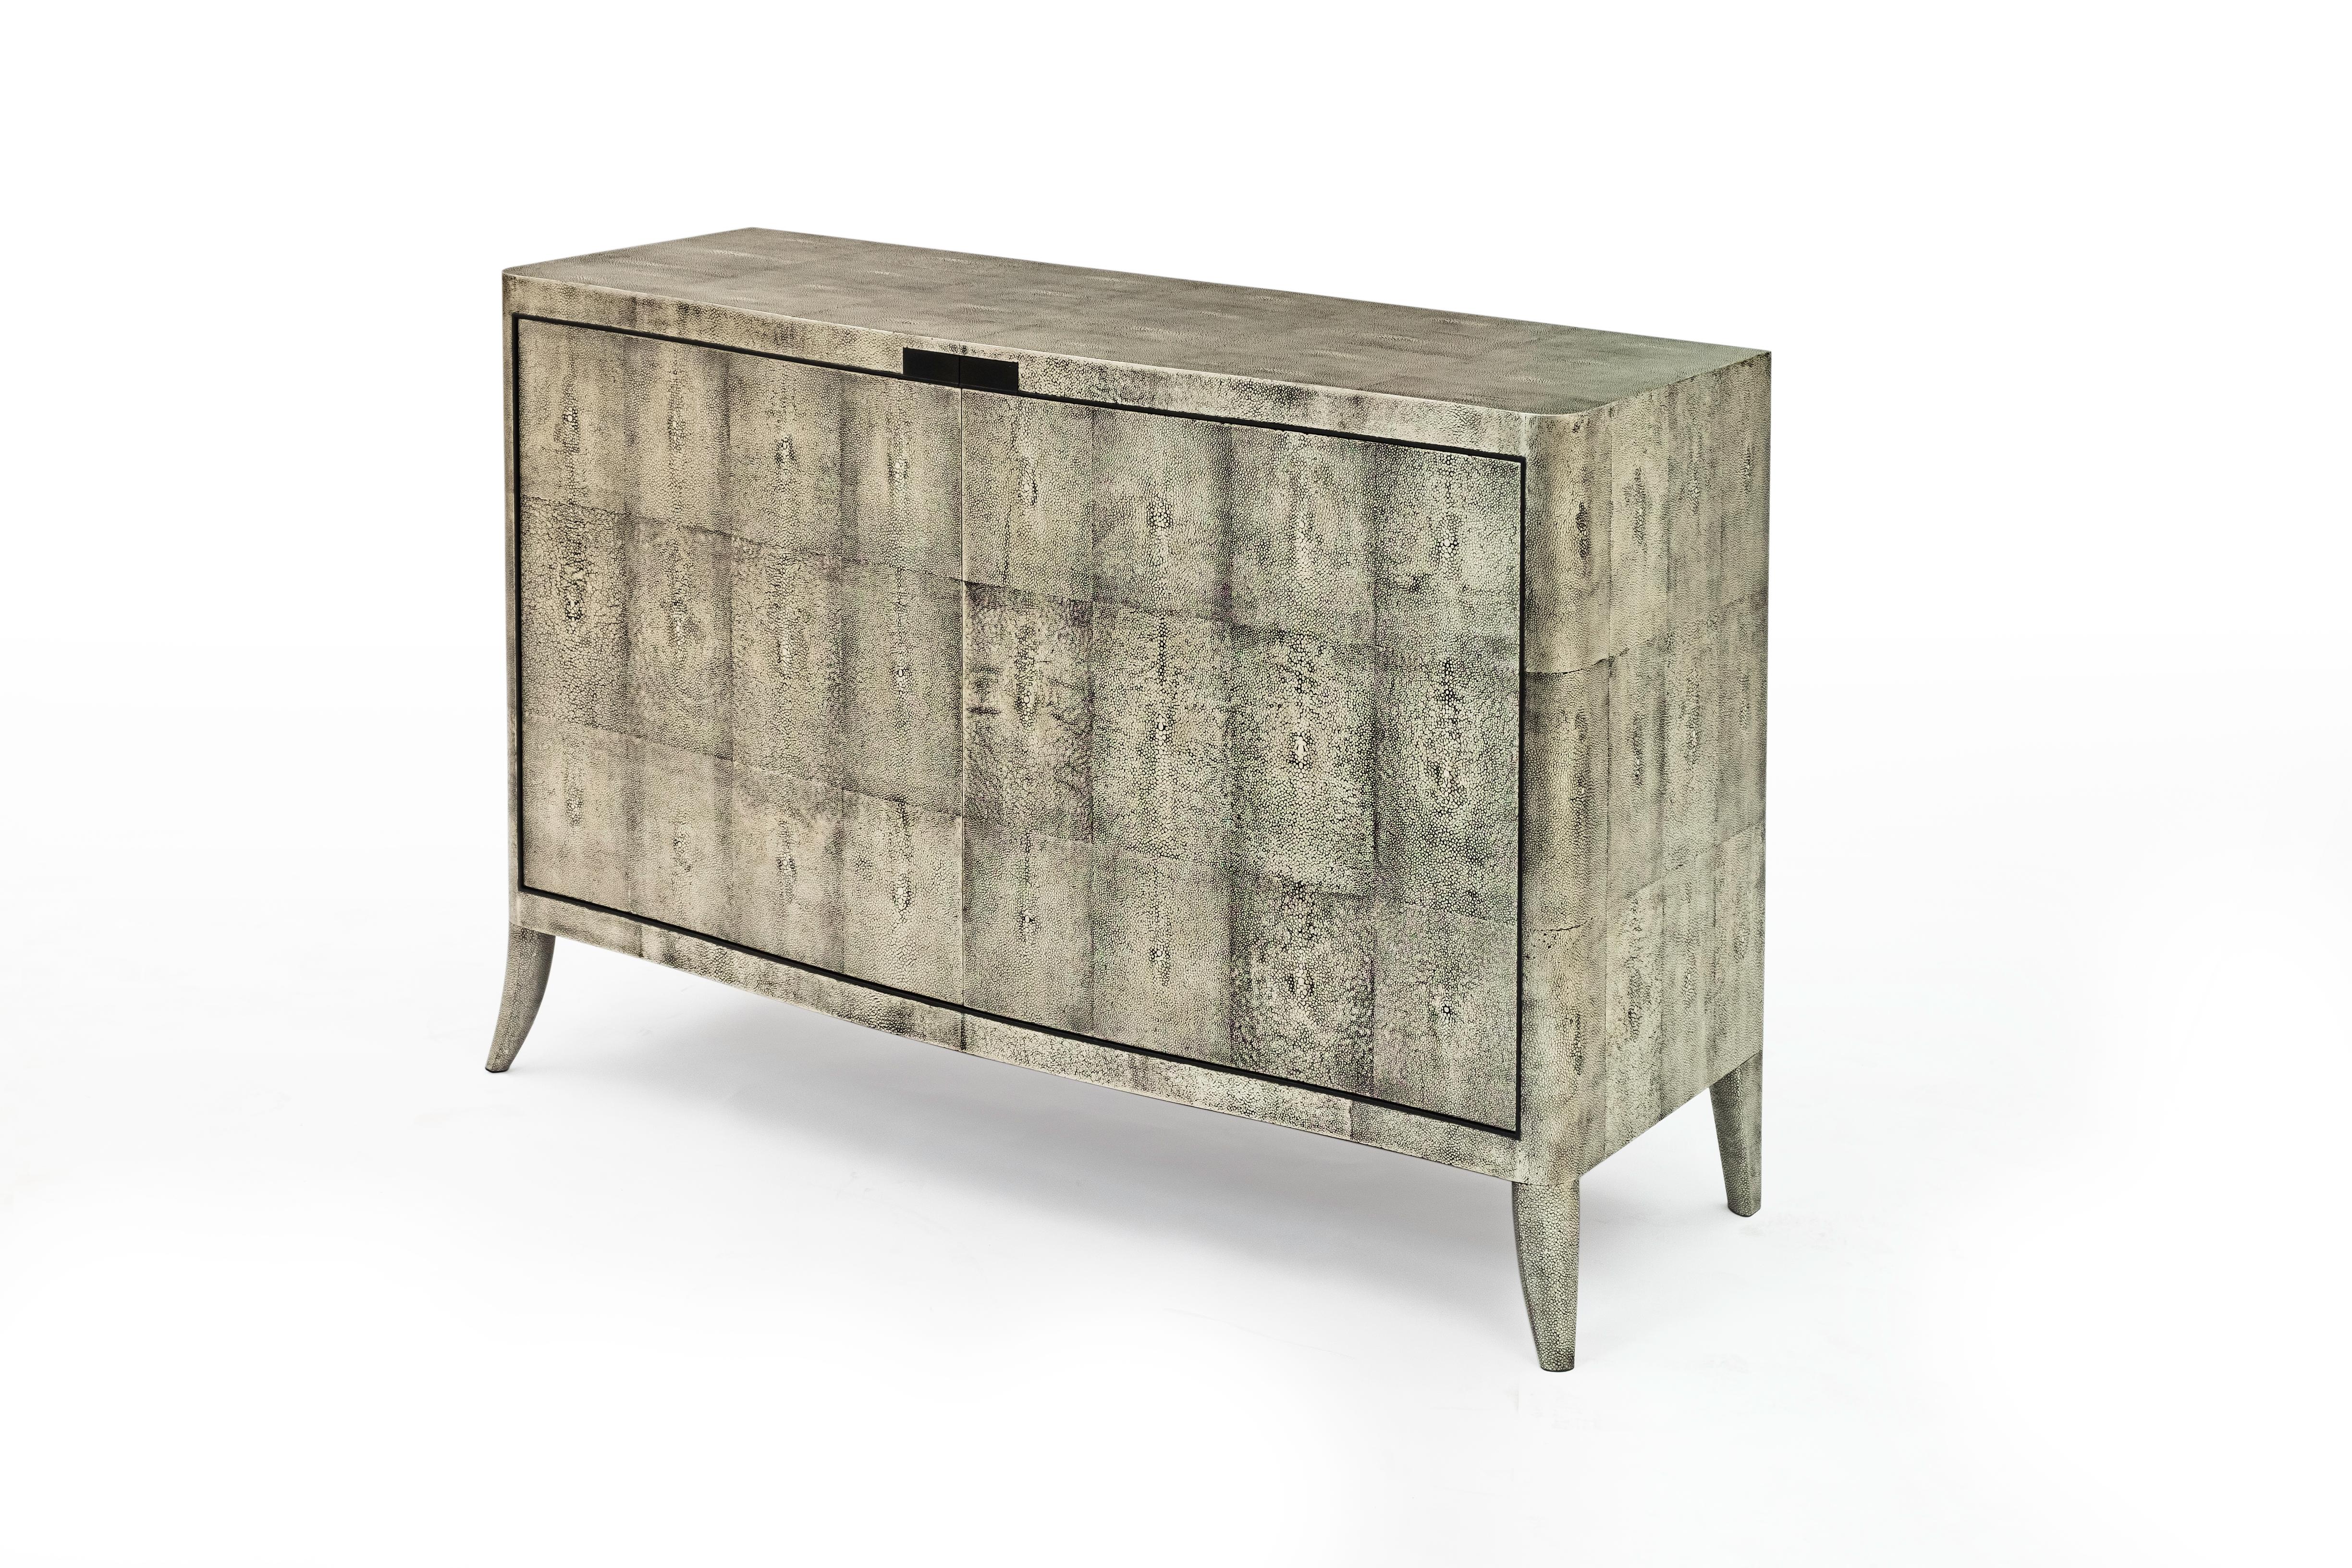 Designed by Jean-Paul Viollet.
Silver Ray Cabinet in white gold leaf on shagreen, grey dyed parchment interior, and Gabon ebony. 